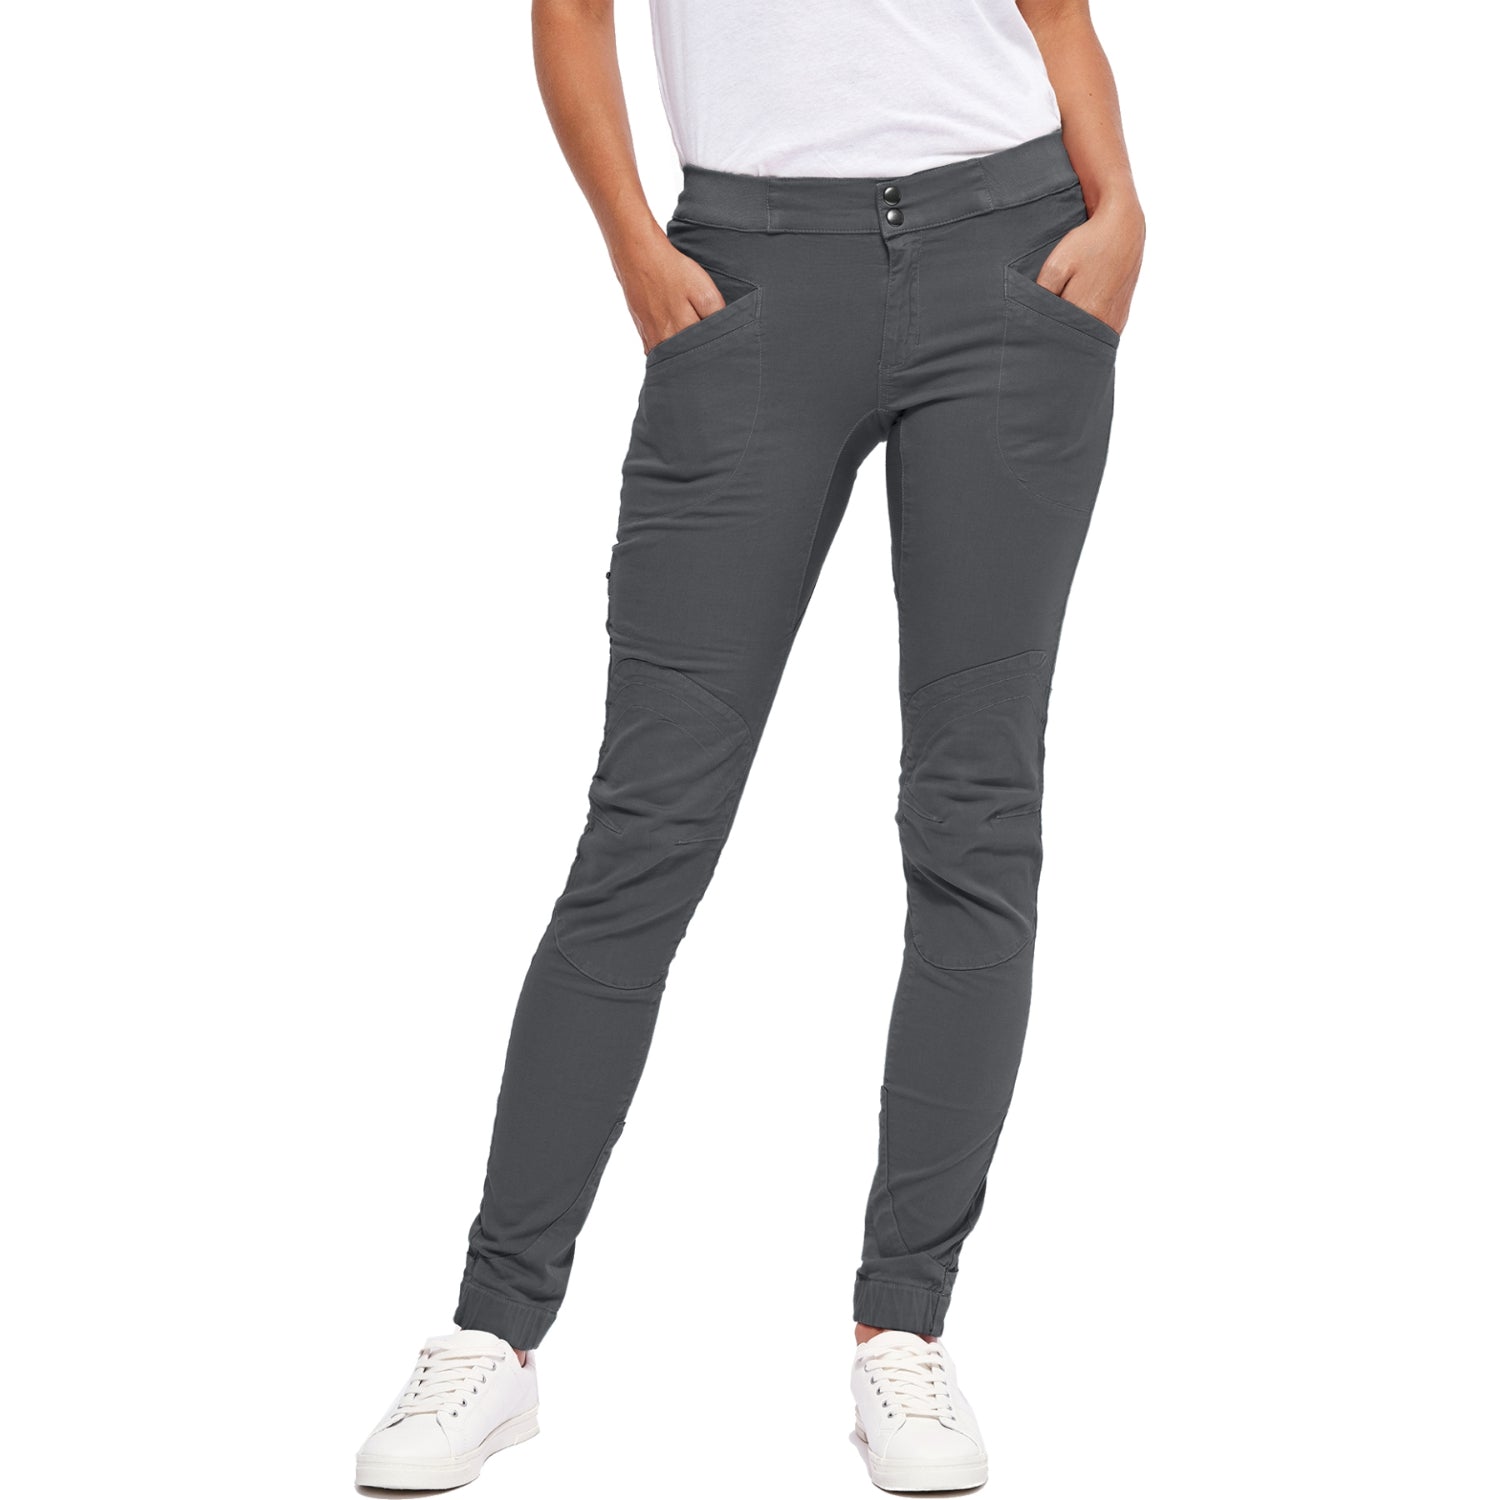 Looking For Wild Laila Peak Pant - Womens (Grey)